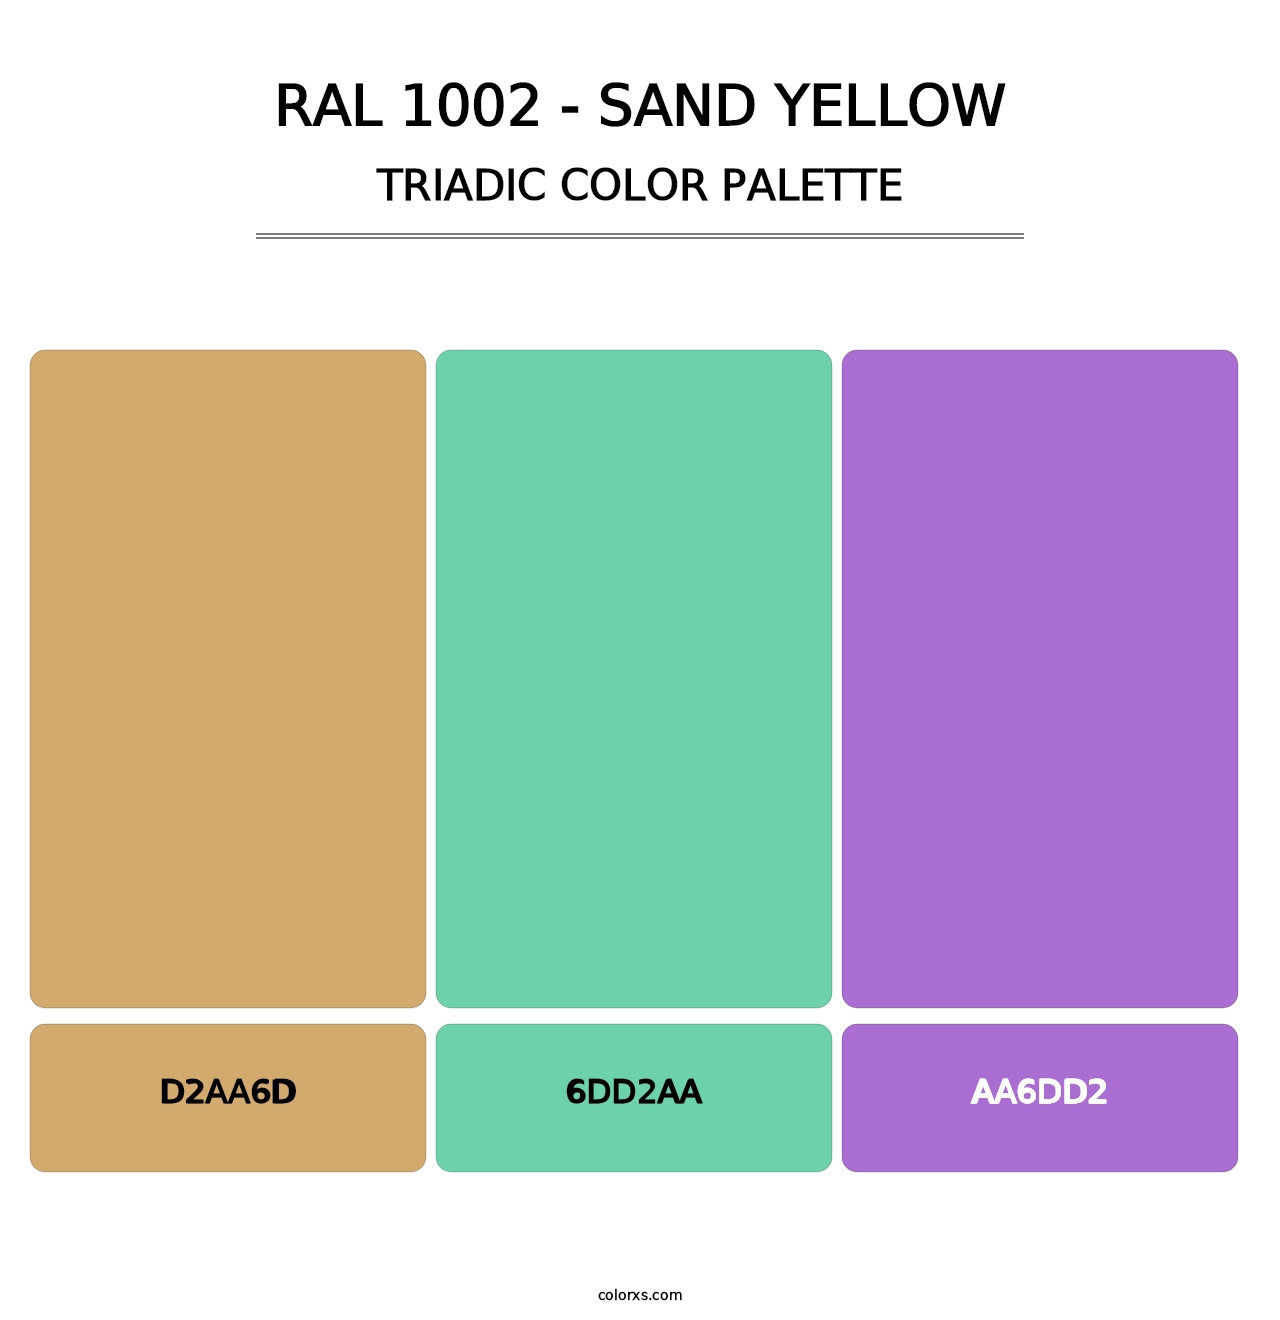 RAL 1002 - Sand Yellow - Triadic Color Palette